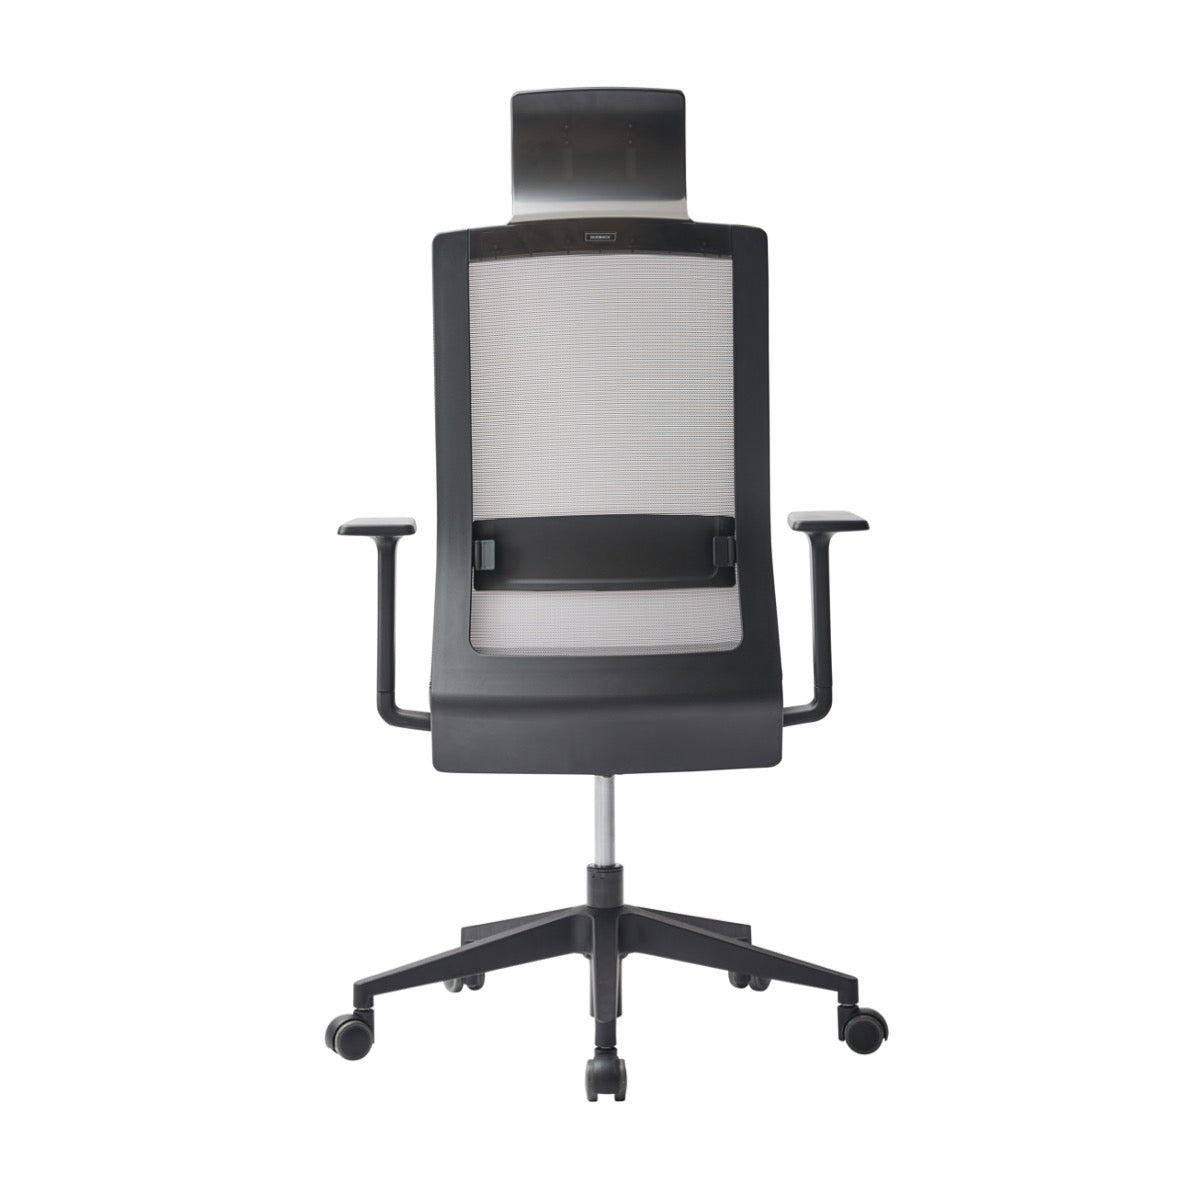 DUOREST Duoflex Square Office Home Ergonomic Mesh Office Chair, Black Frame